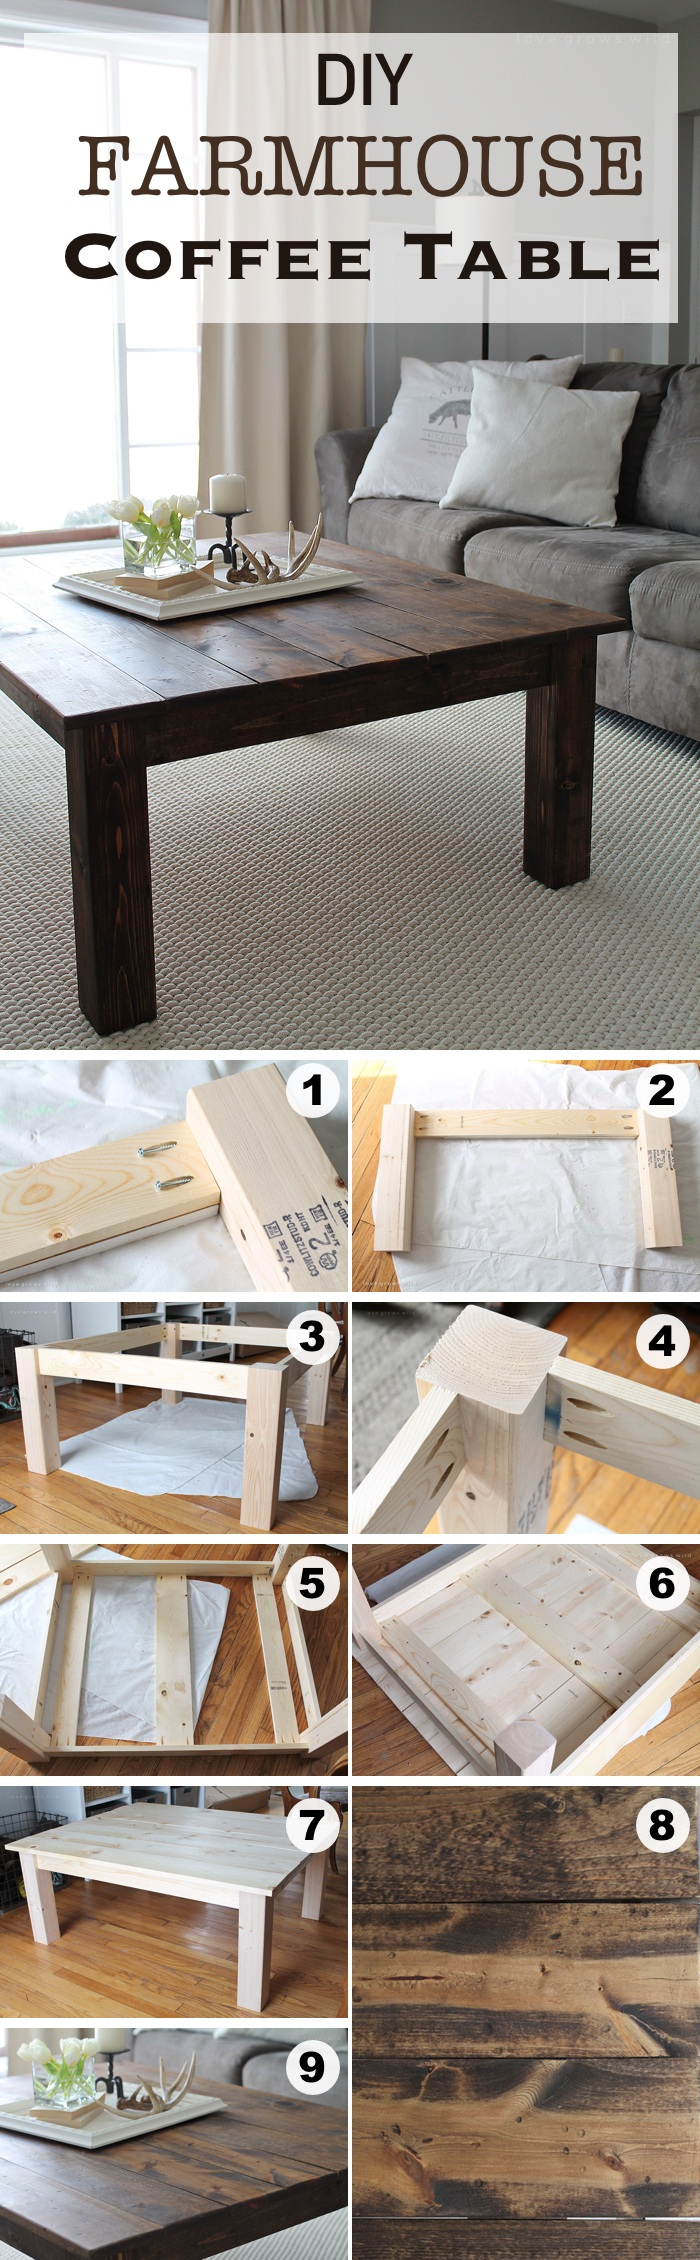 15 Creative Diy Coffee Table Ideas You Can Build Yourself Homelovr pertaining to measurements 700 X 2260